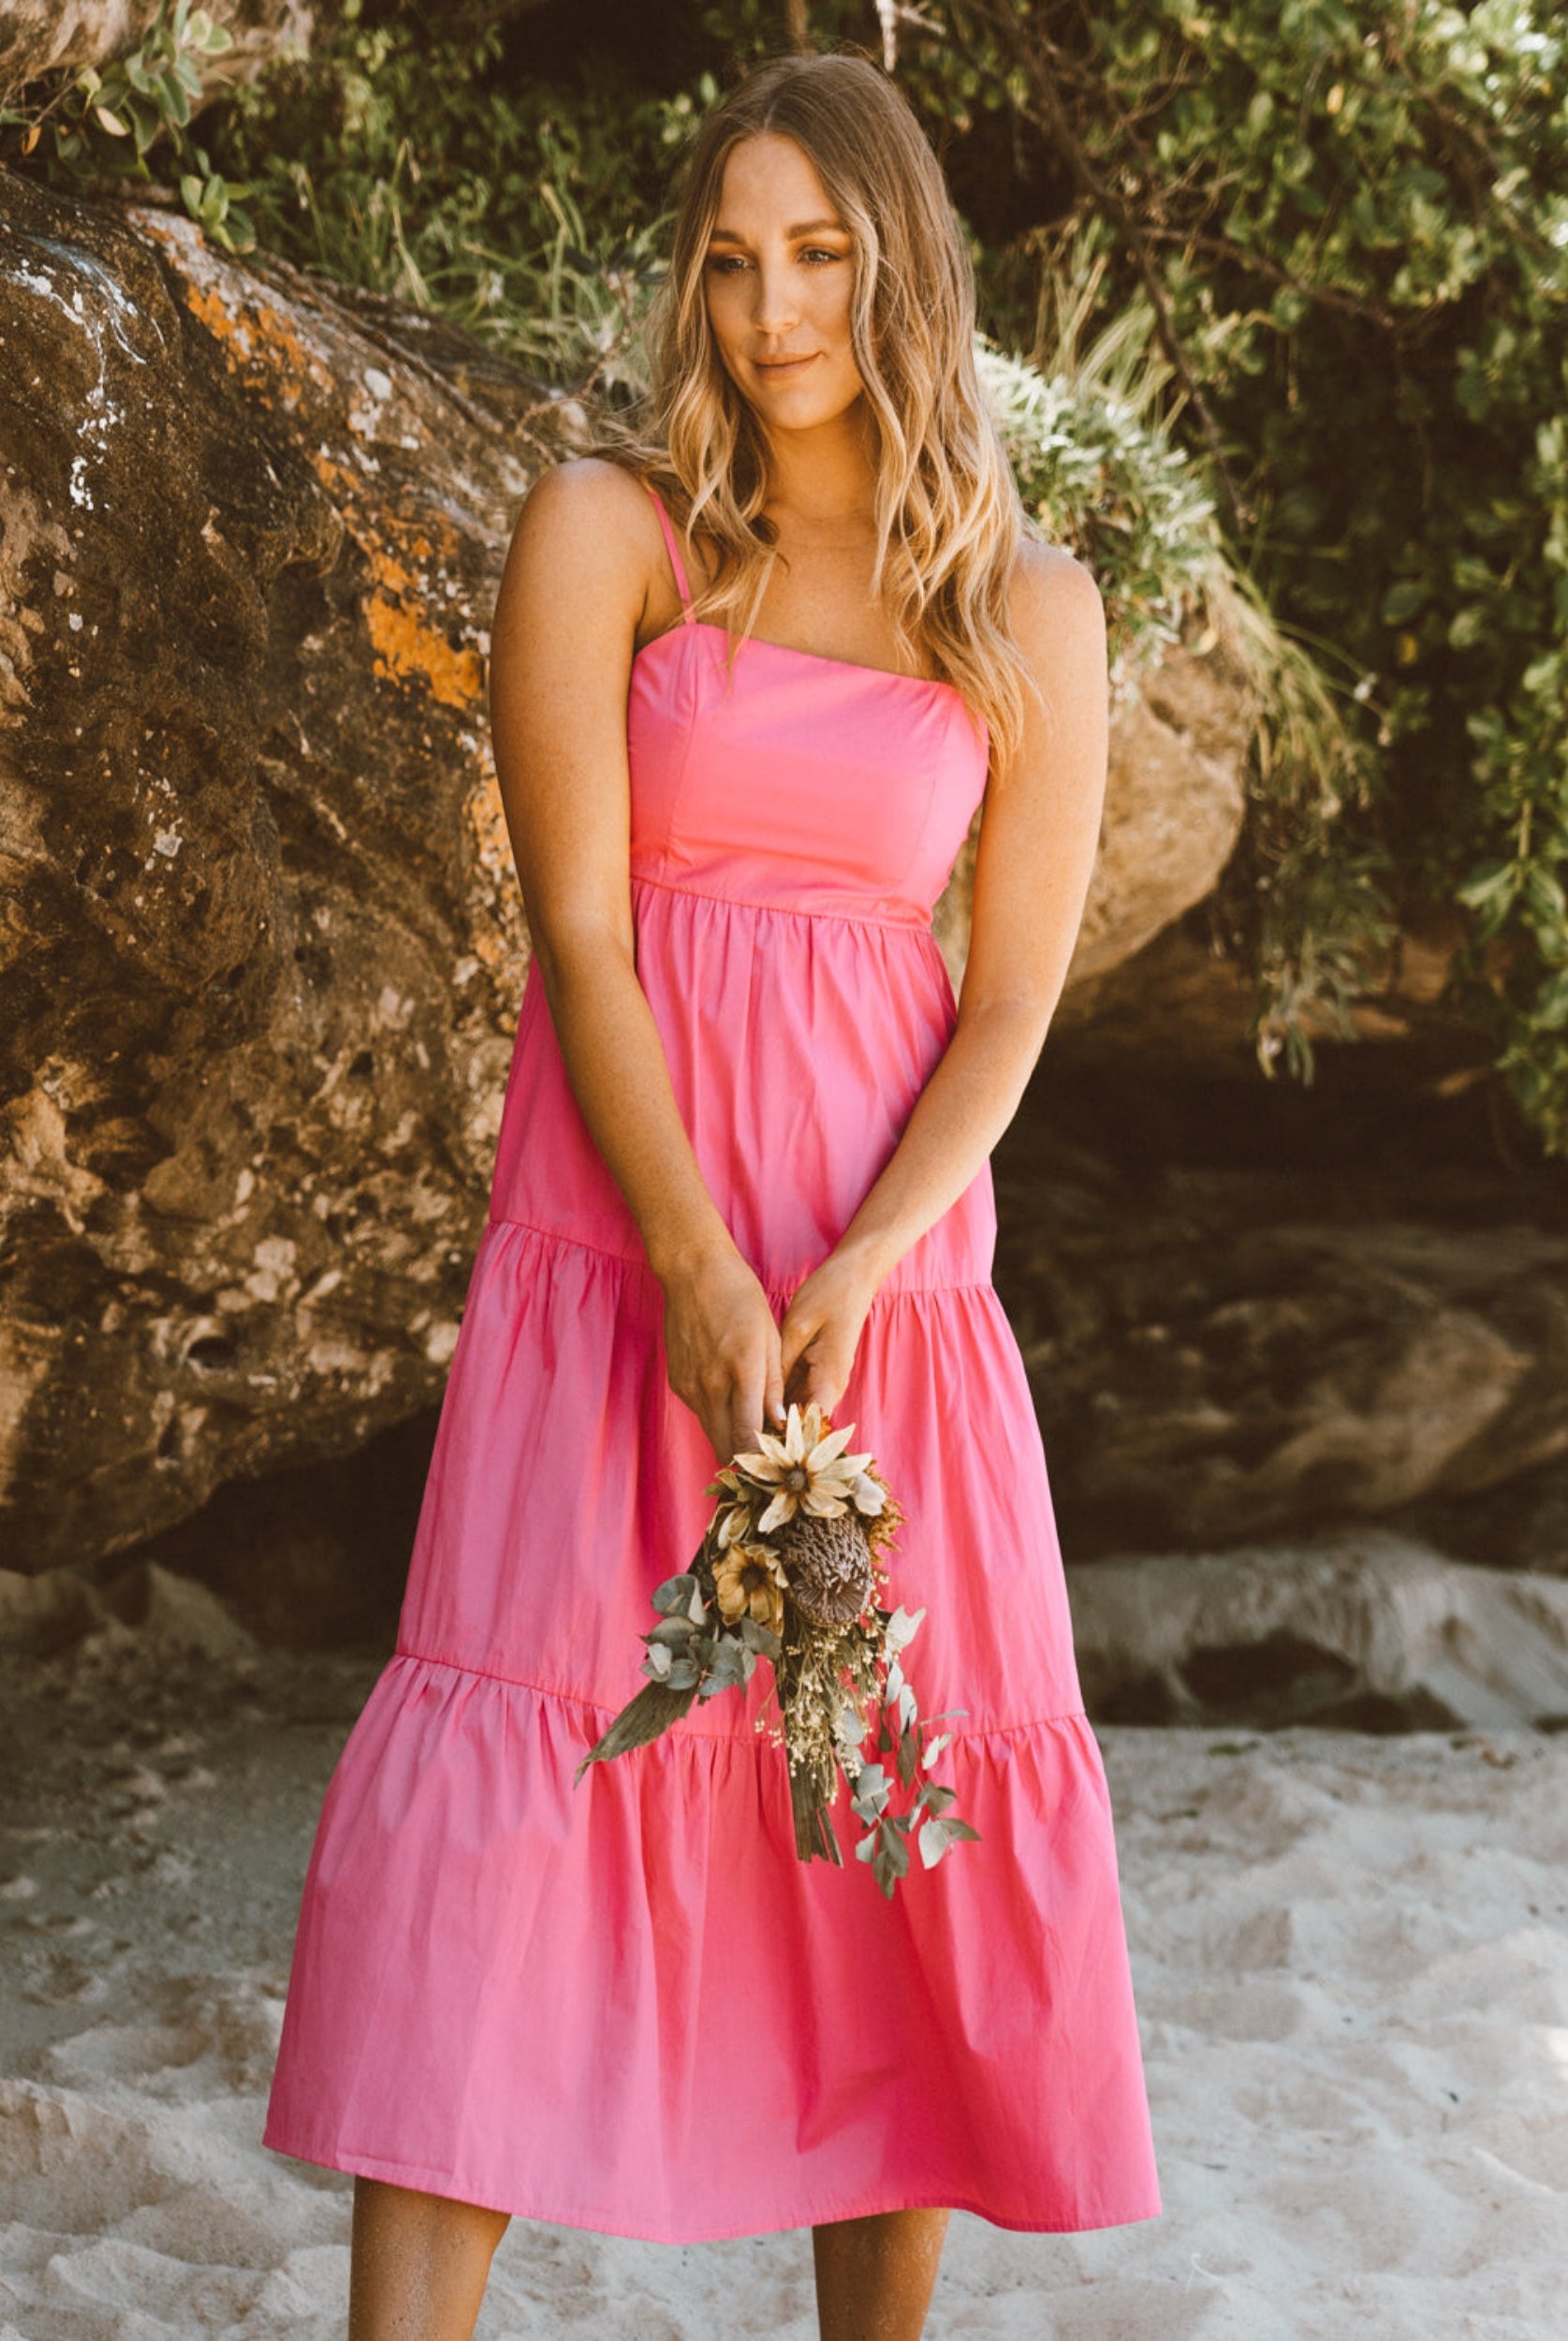 Model wearing the strappy matilda maxi dress in candy pink